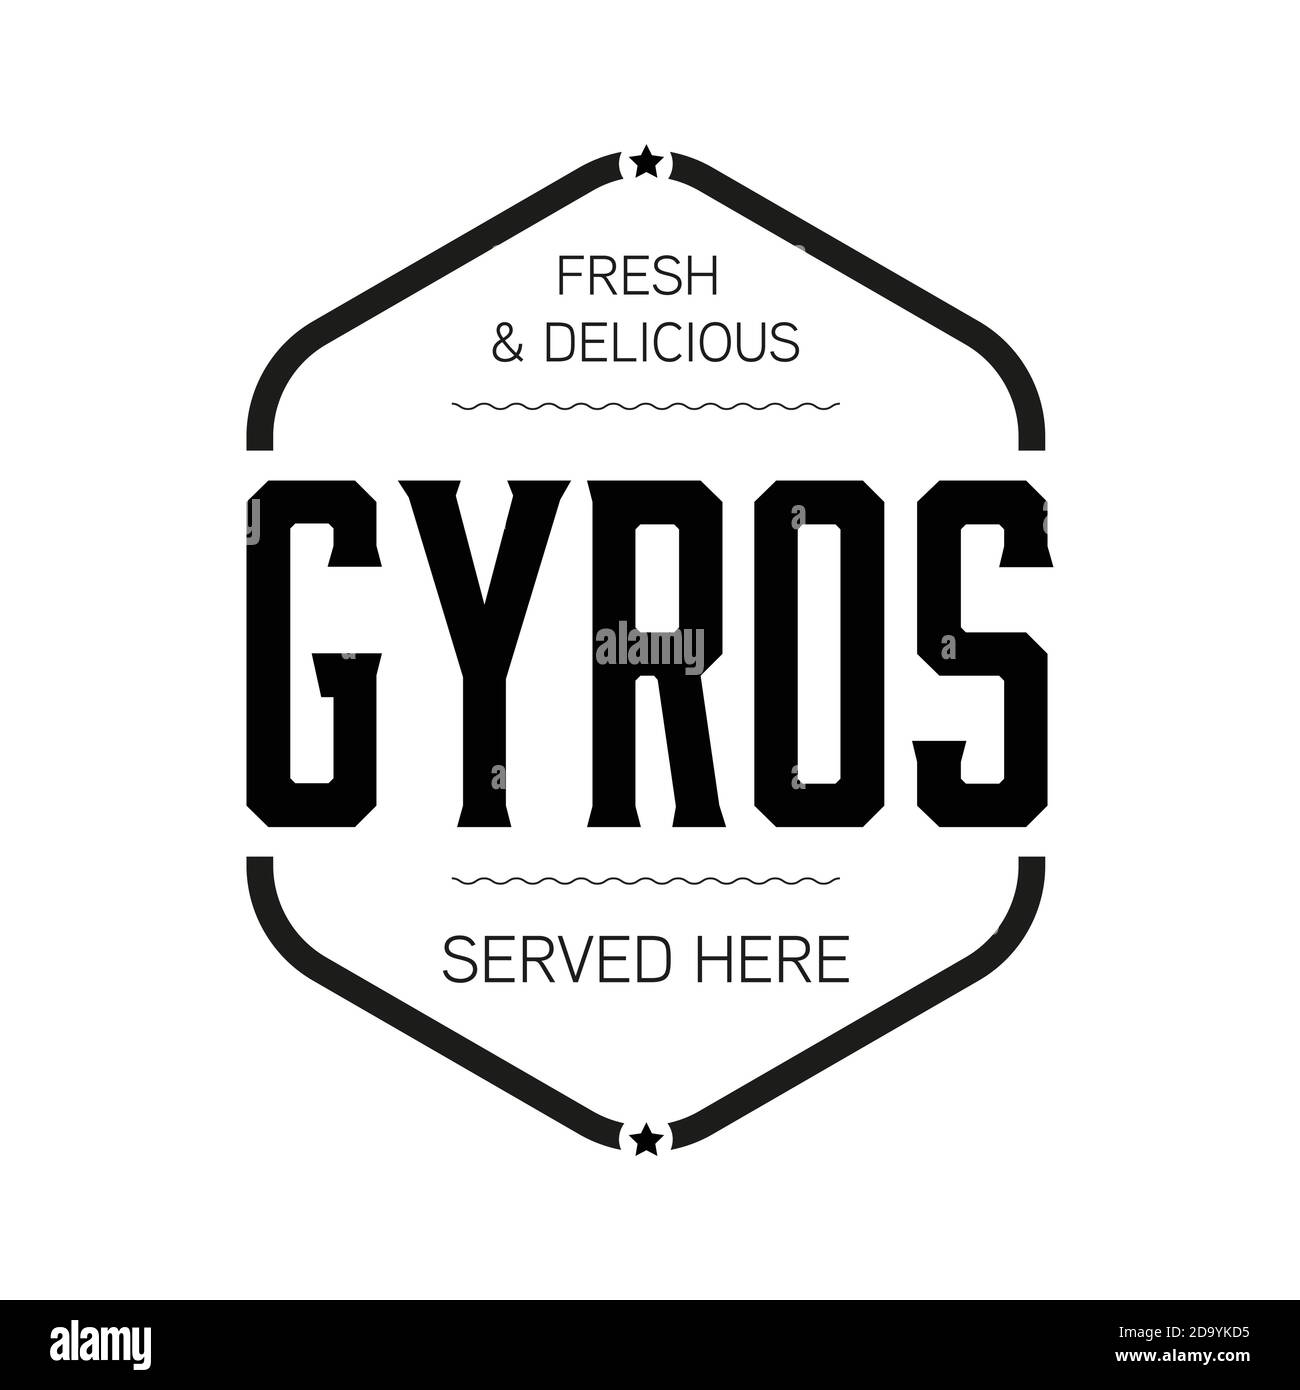 Delicious Gyros sign vintage stamp Stock Vector